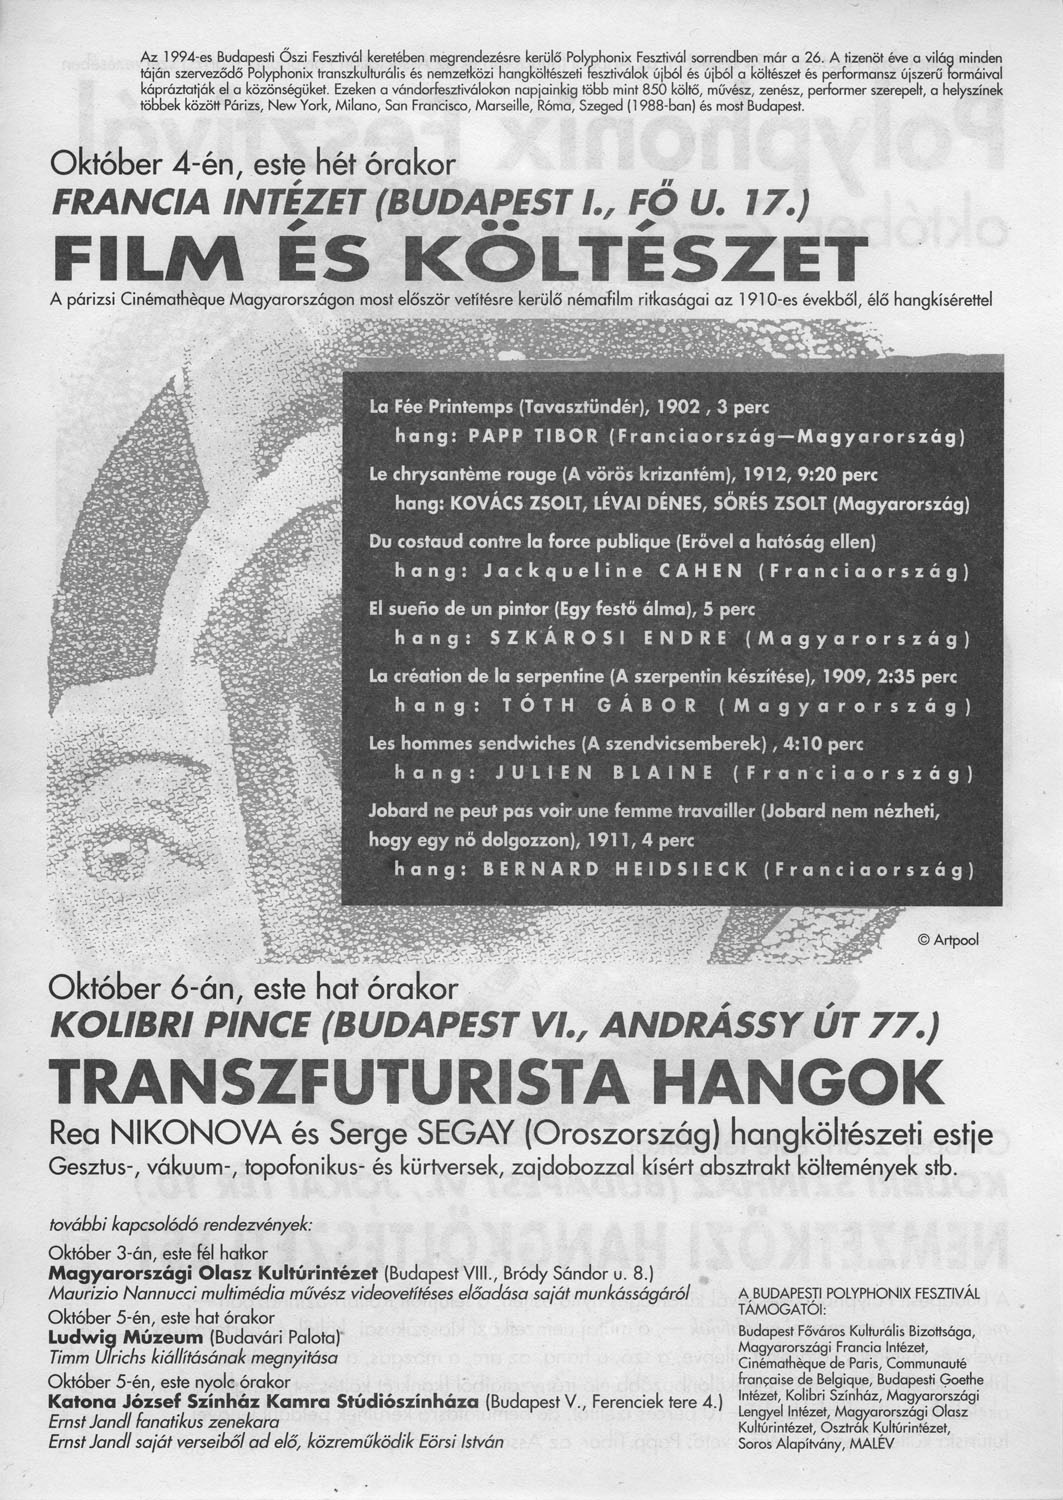 Poster for the three day long Polyphonix Festival organized by Artpool at the French Cultural Institute and Kolibri Theatre, Budapest, 1994 (2nd page)